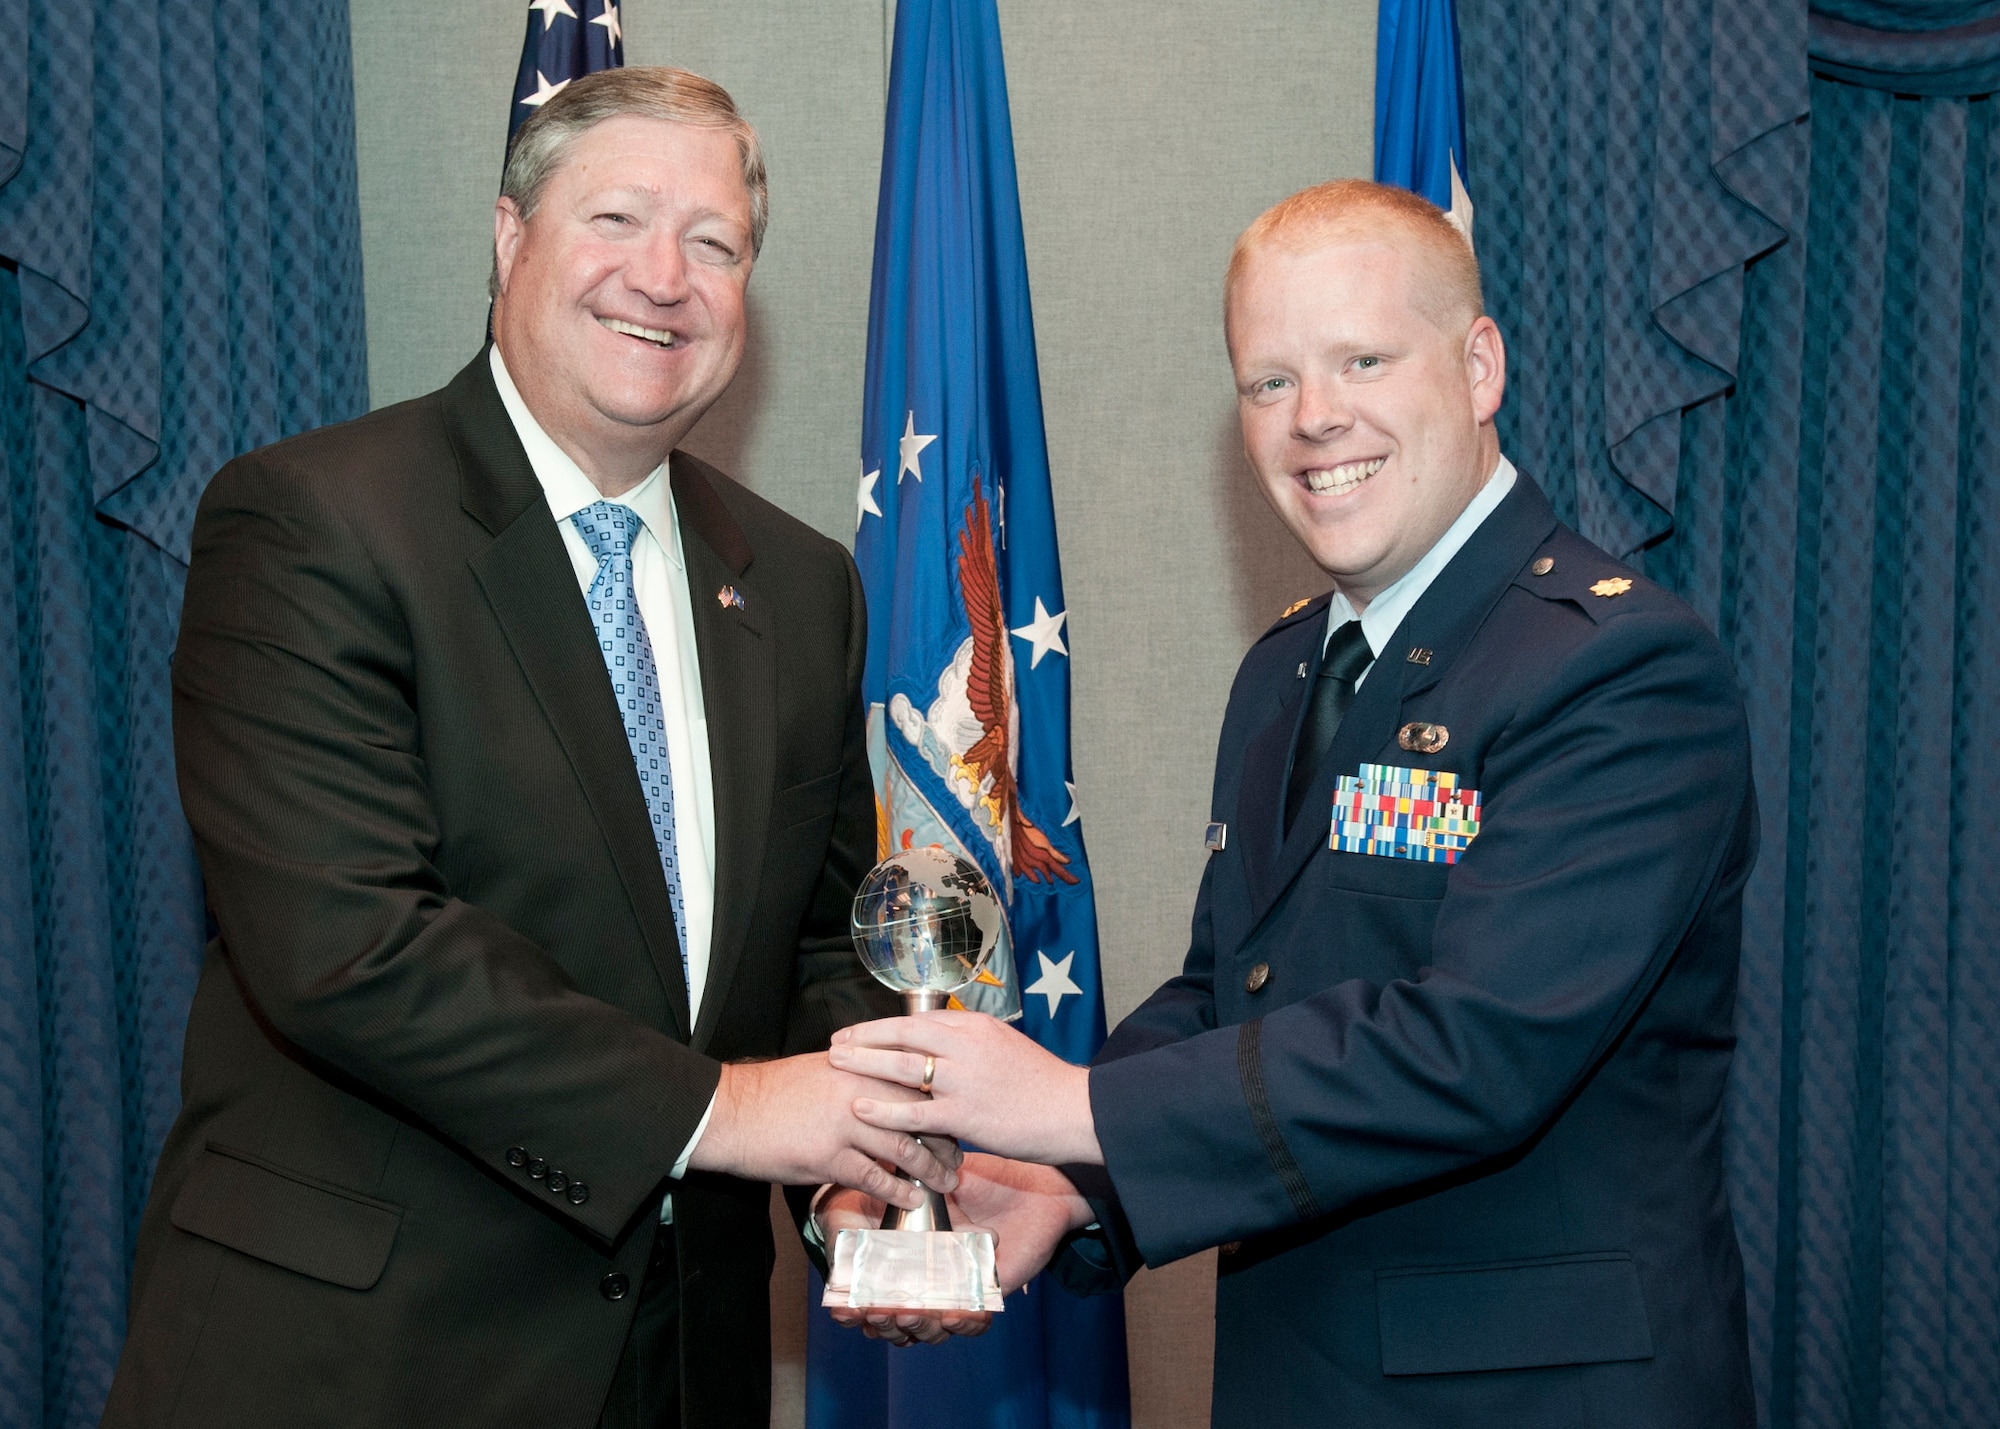 Secretary of the Air Force Michael Donley presents Maj. Paul Sebold with the Air Force International Affairs Excellence Award for 2010 during a ceremony May 31, 2011, in the Pentagon. Established in 2008, the annual award recognizes the Air Force member who is judged to most effectively build, sustain, expand and guide enduring international relationships. Major Sebold is assigned to Headquarters U.S. Air Forces in Europe at Ramstein Air Base, Germany, as a political military affairs strategist and country desk officer. (U.S. Air Force photo/Jim Varhegyi)